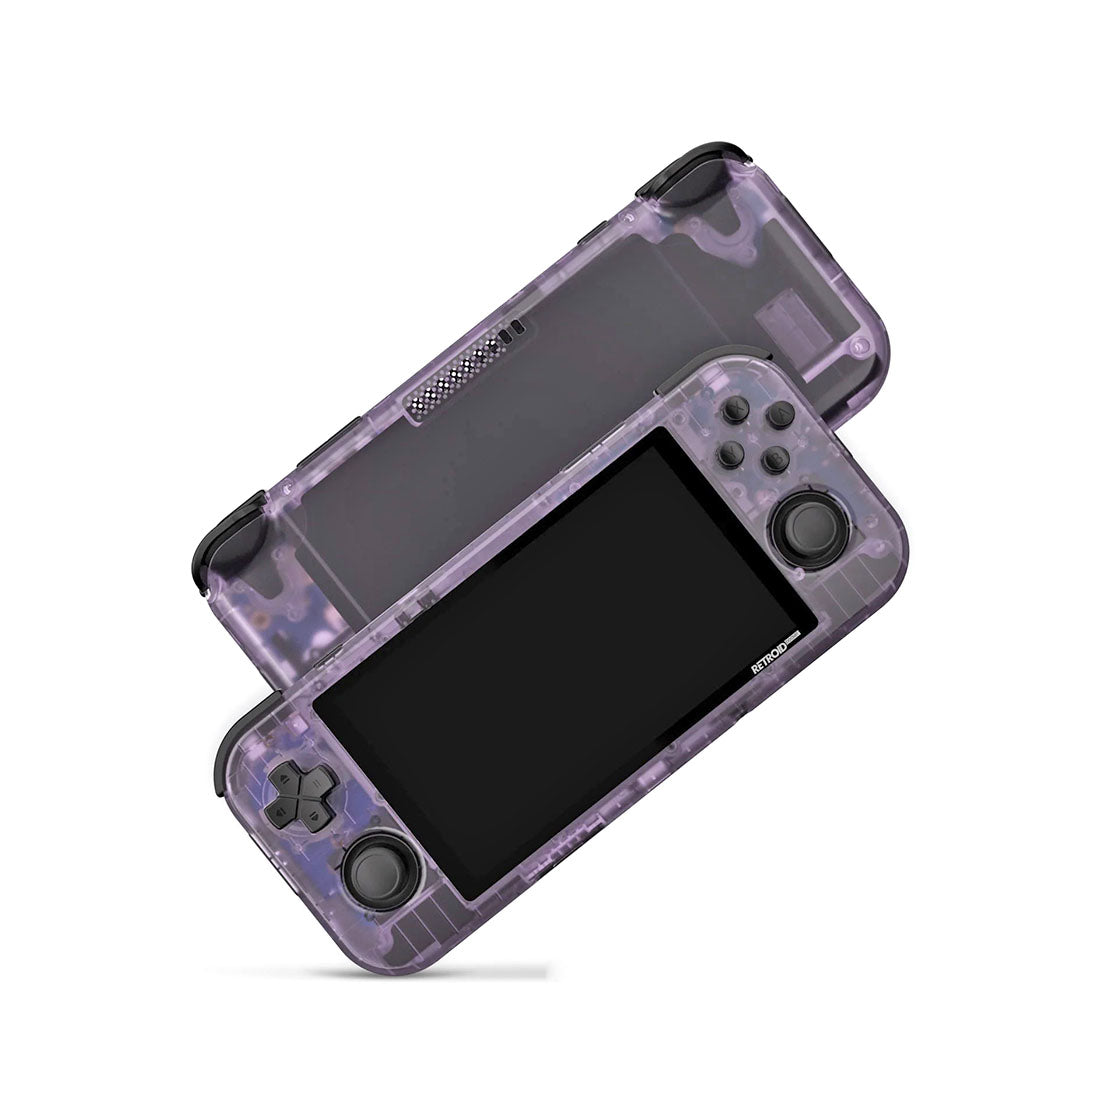 Retroid Pocket 3+ Android Handheld Game Console | Mechdiy